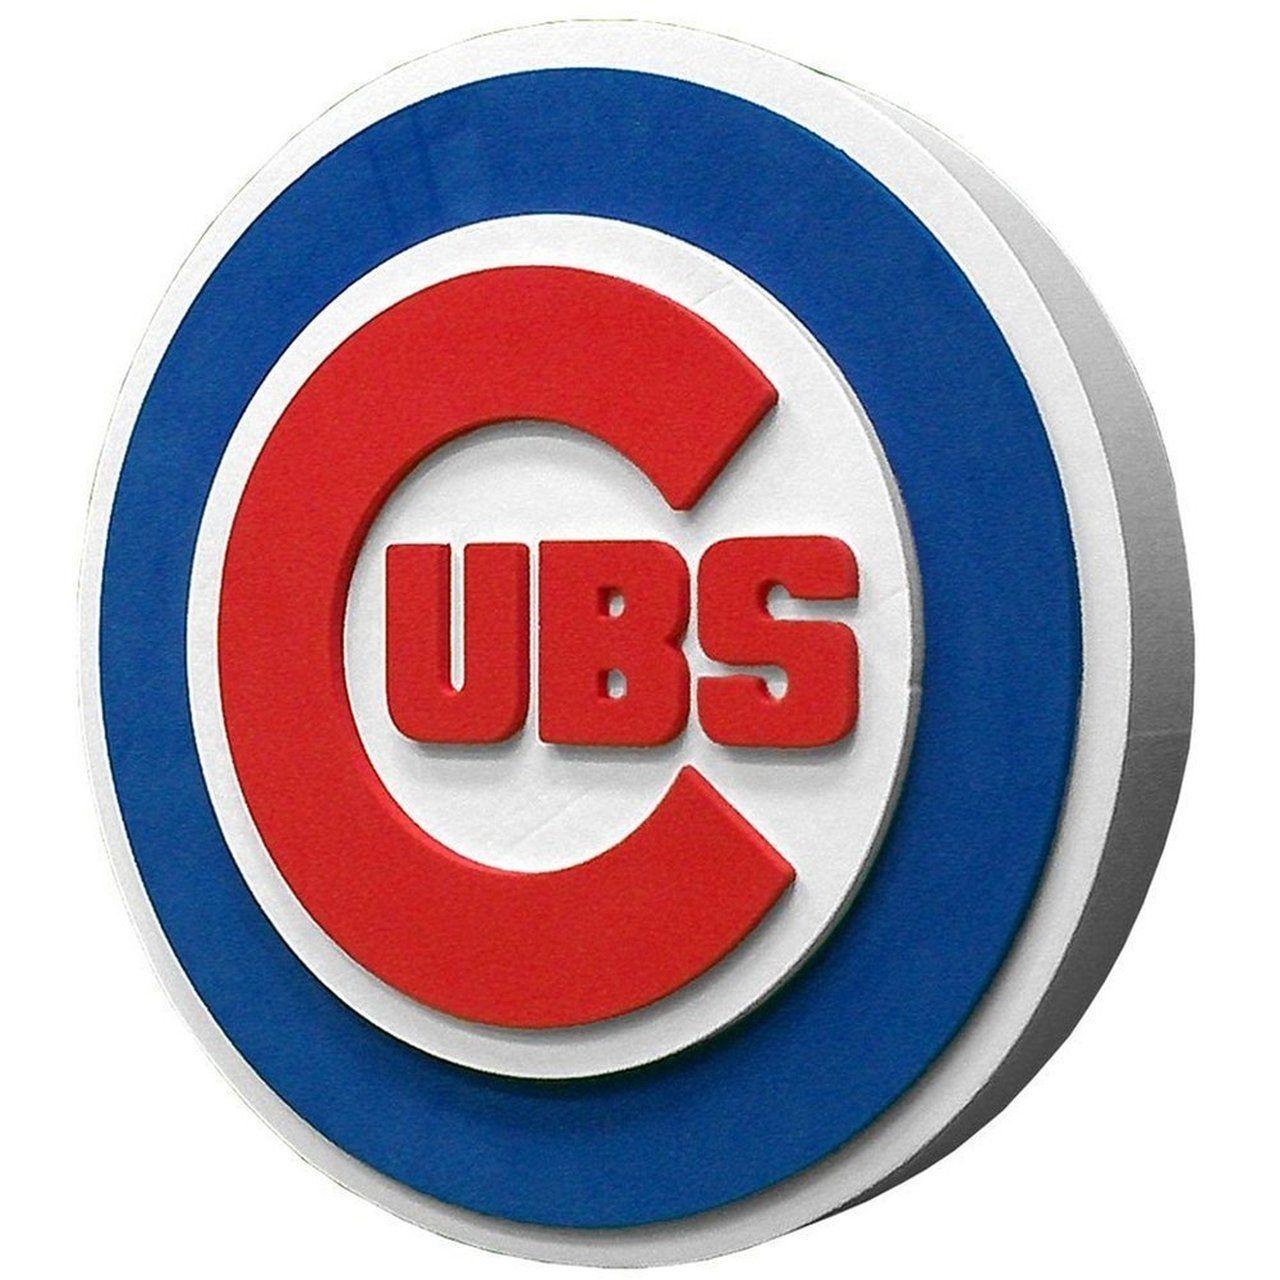 Foam Logo - Chicago Cubs 3D Hand Foam Logo Sign With Strap by FoamHeads